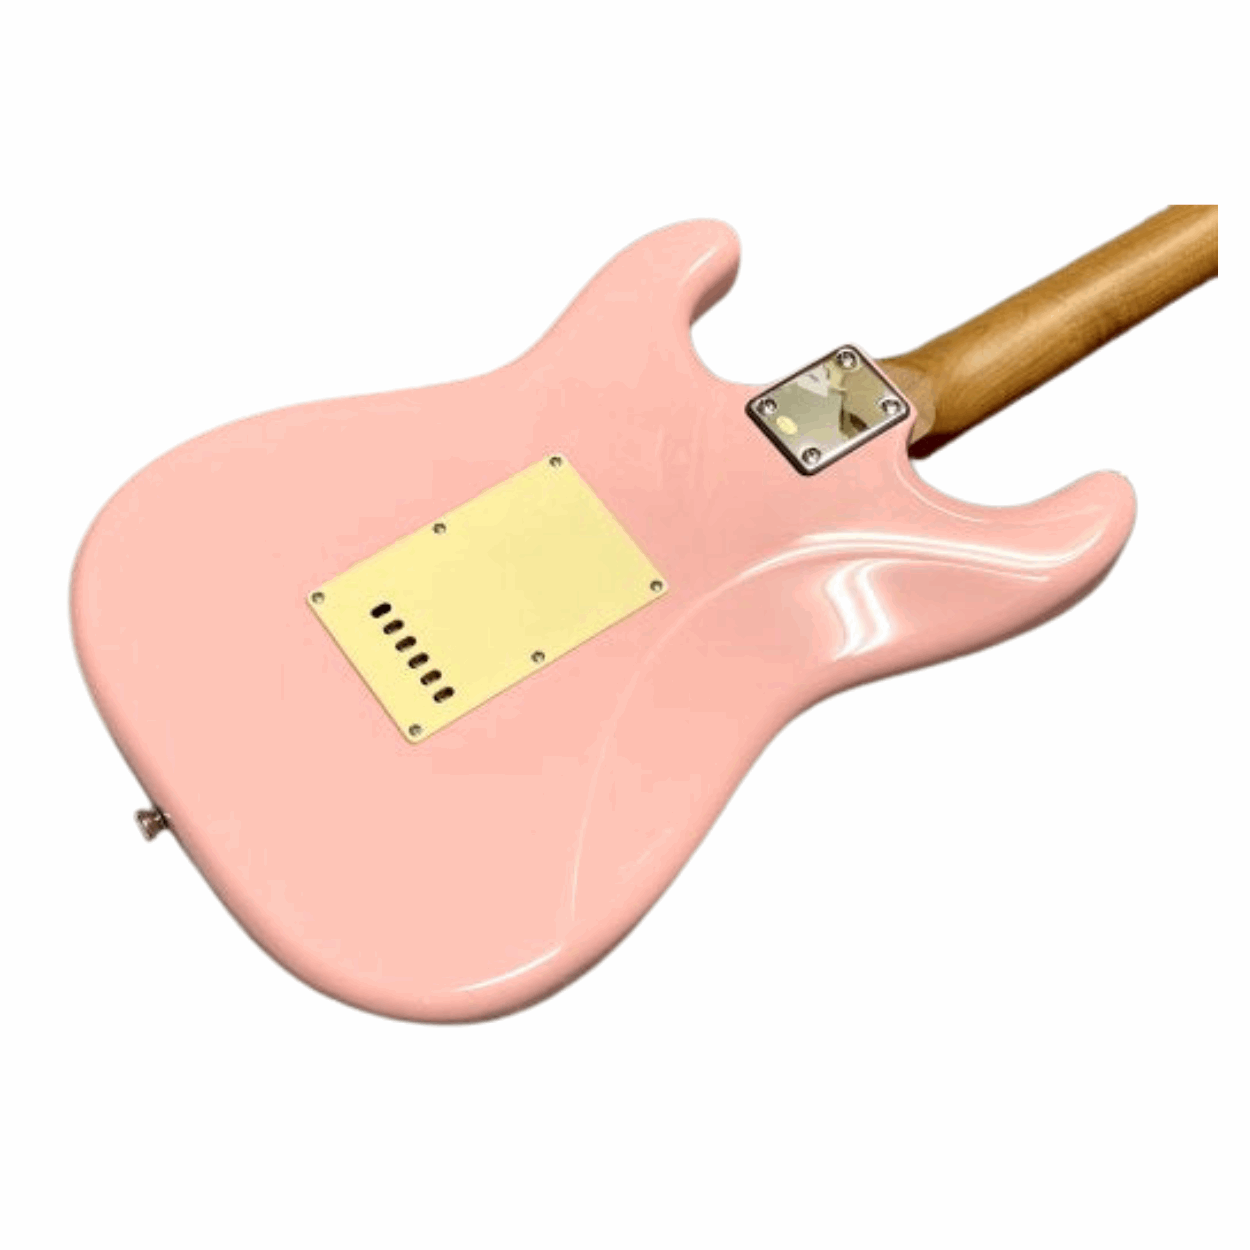 Bacchus Bst-1-rsm/m-slpk Universe Series Roasted Maple Electric Guitar, Shell Pink With Bag